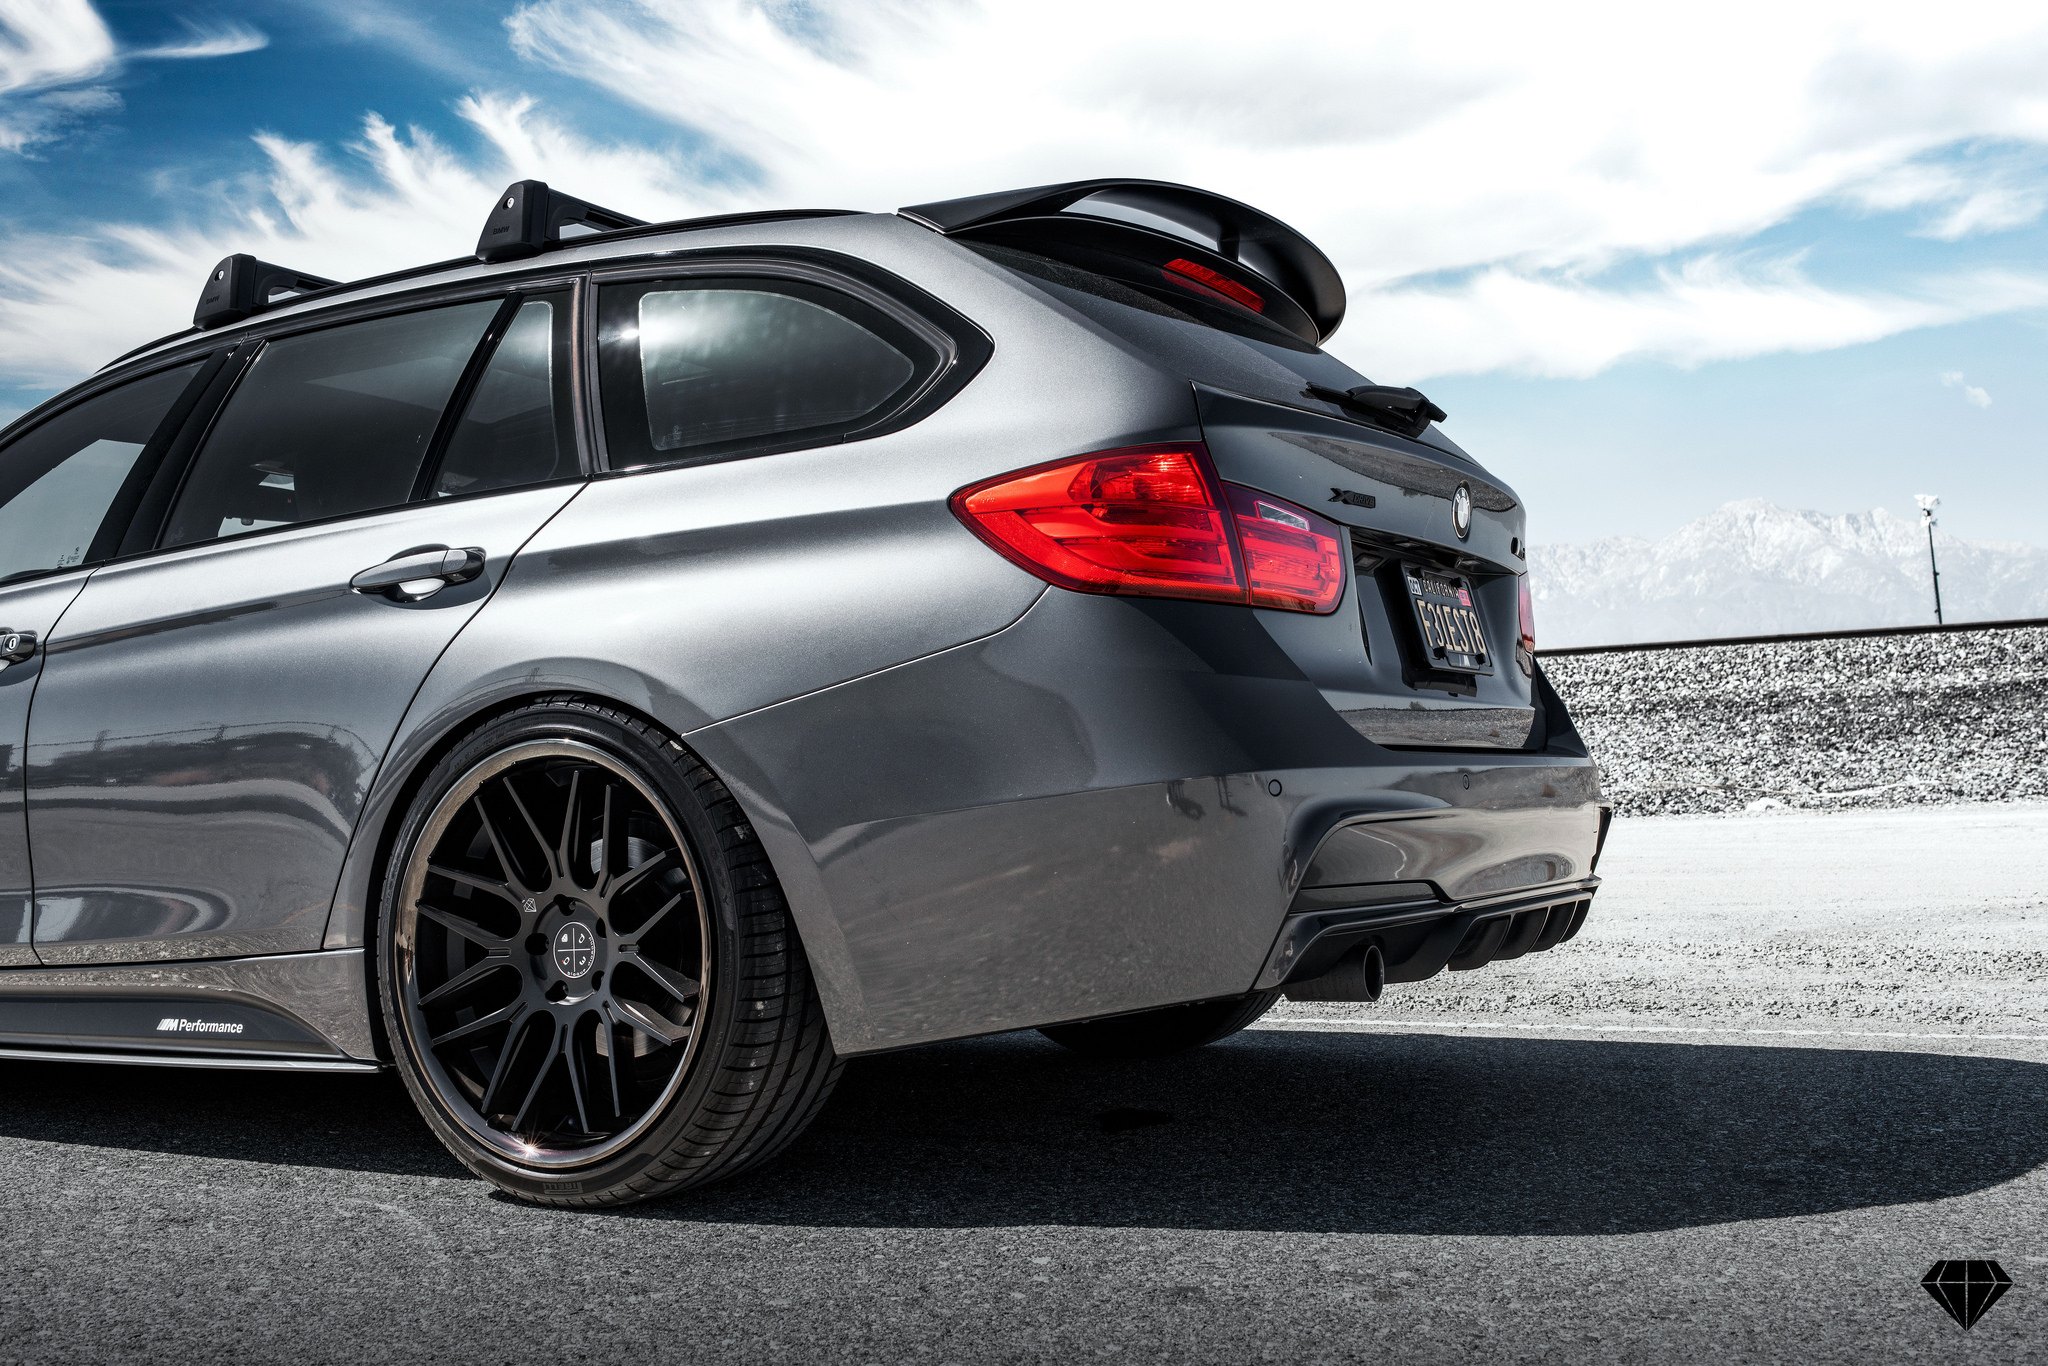 Aftermarket Rear Diffuser on Gray BMW 3-Series - Photo by Blaque Diamond Wheels